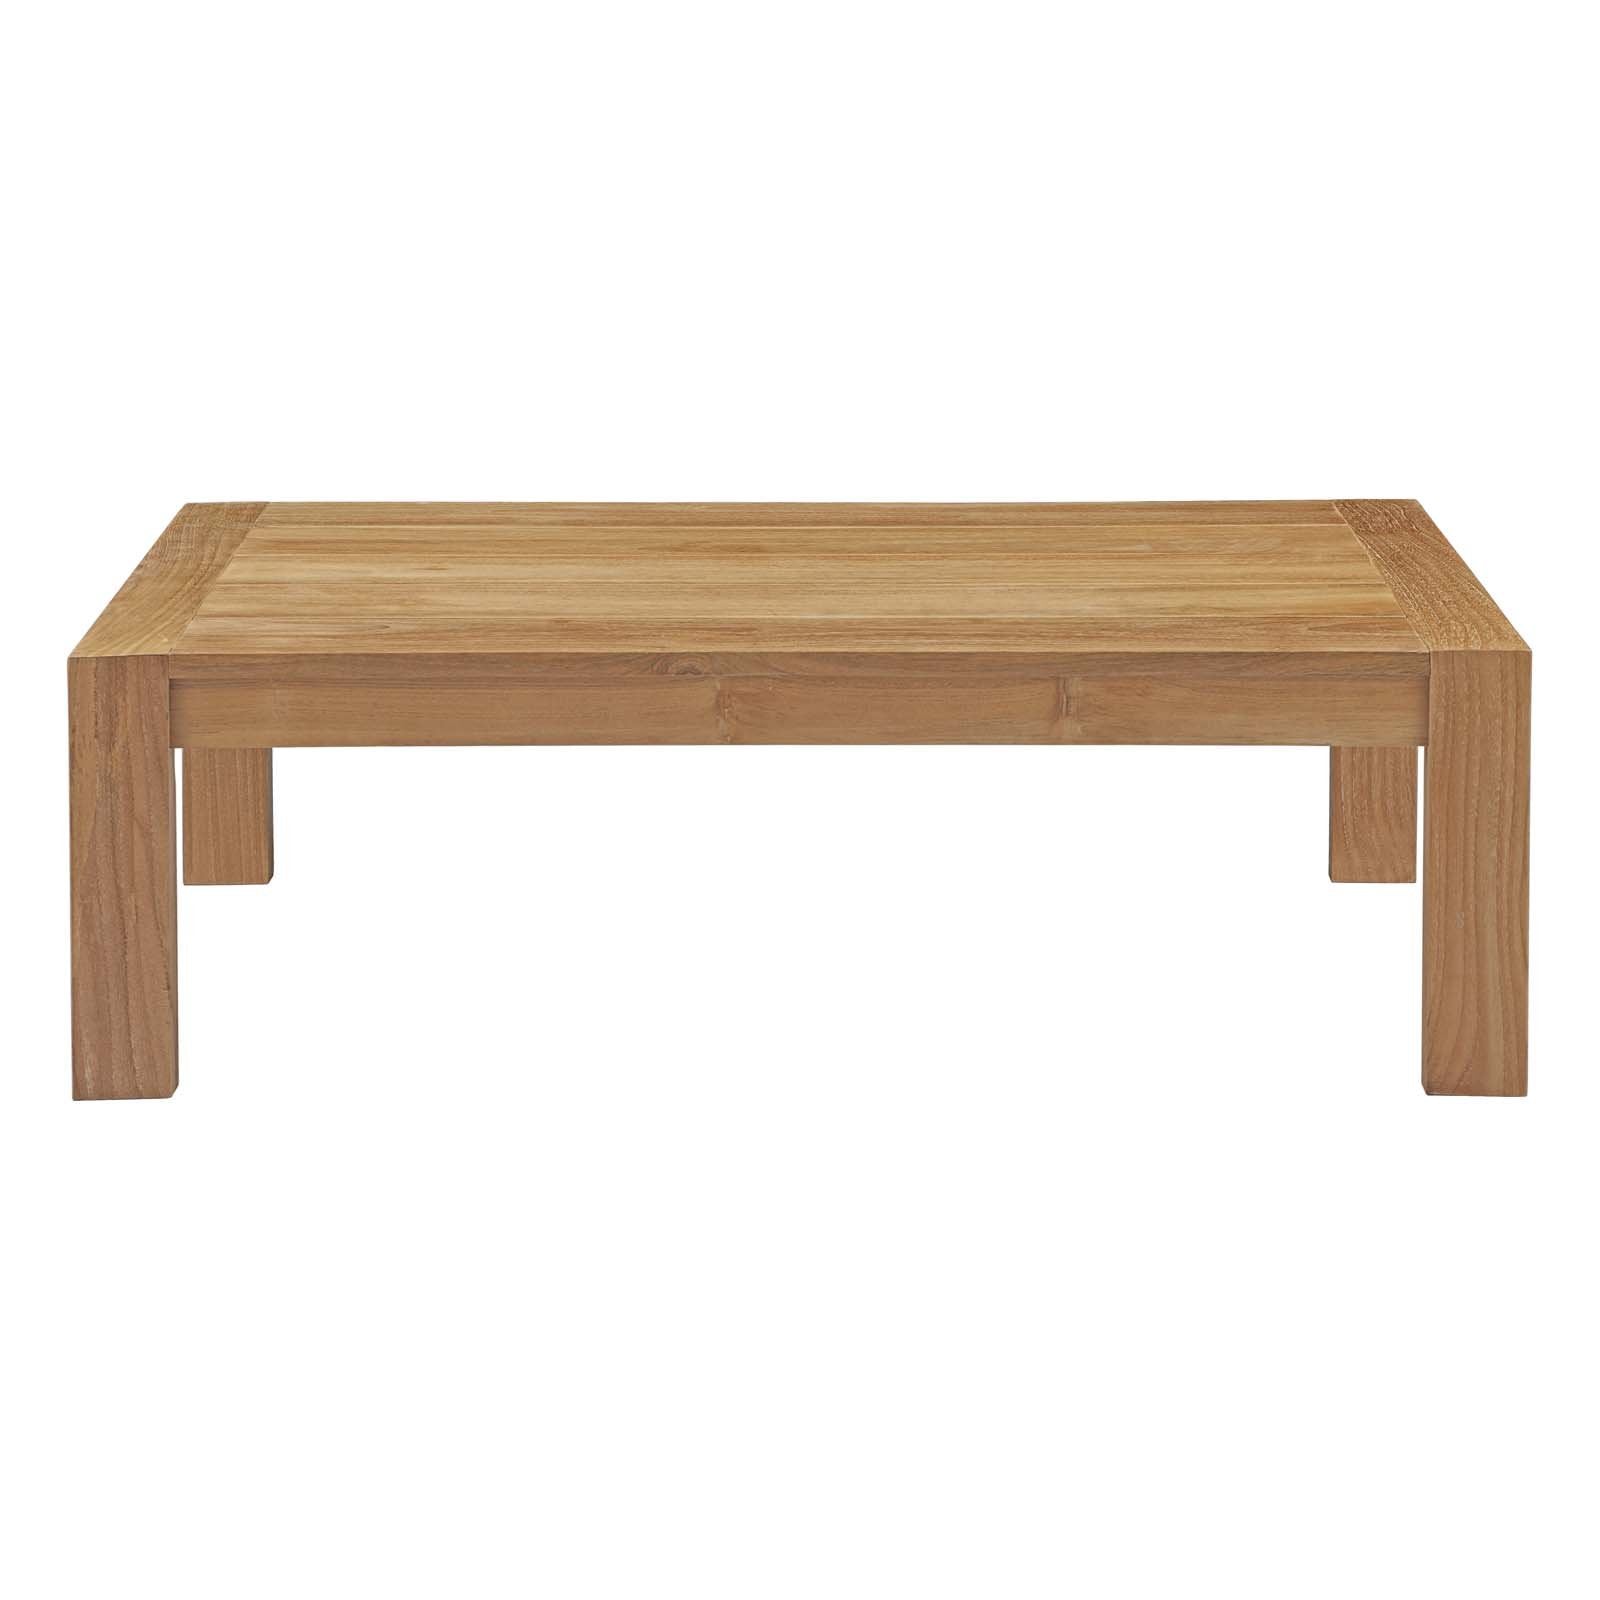 Unity Outdoor Patio Wood Coffee Table - living-essentials